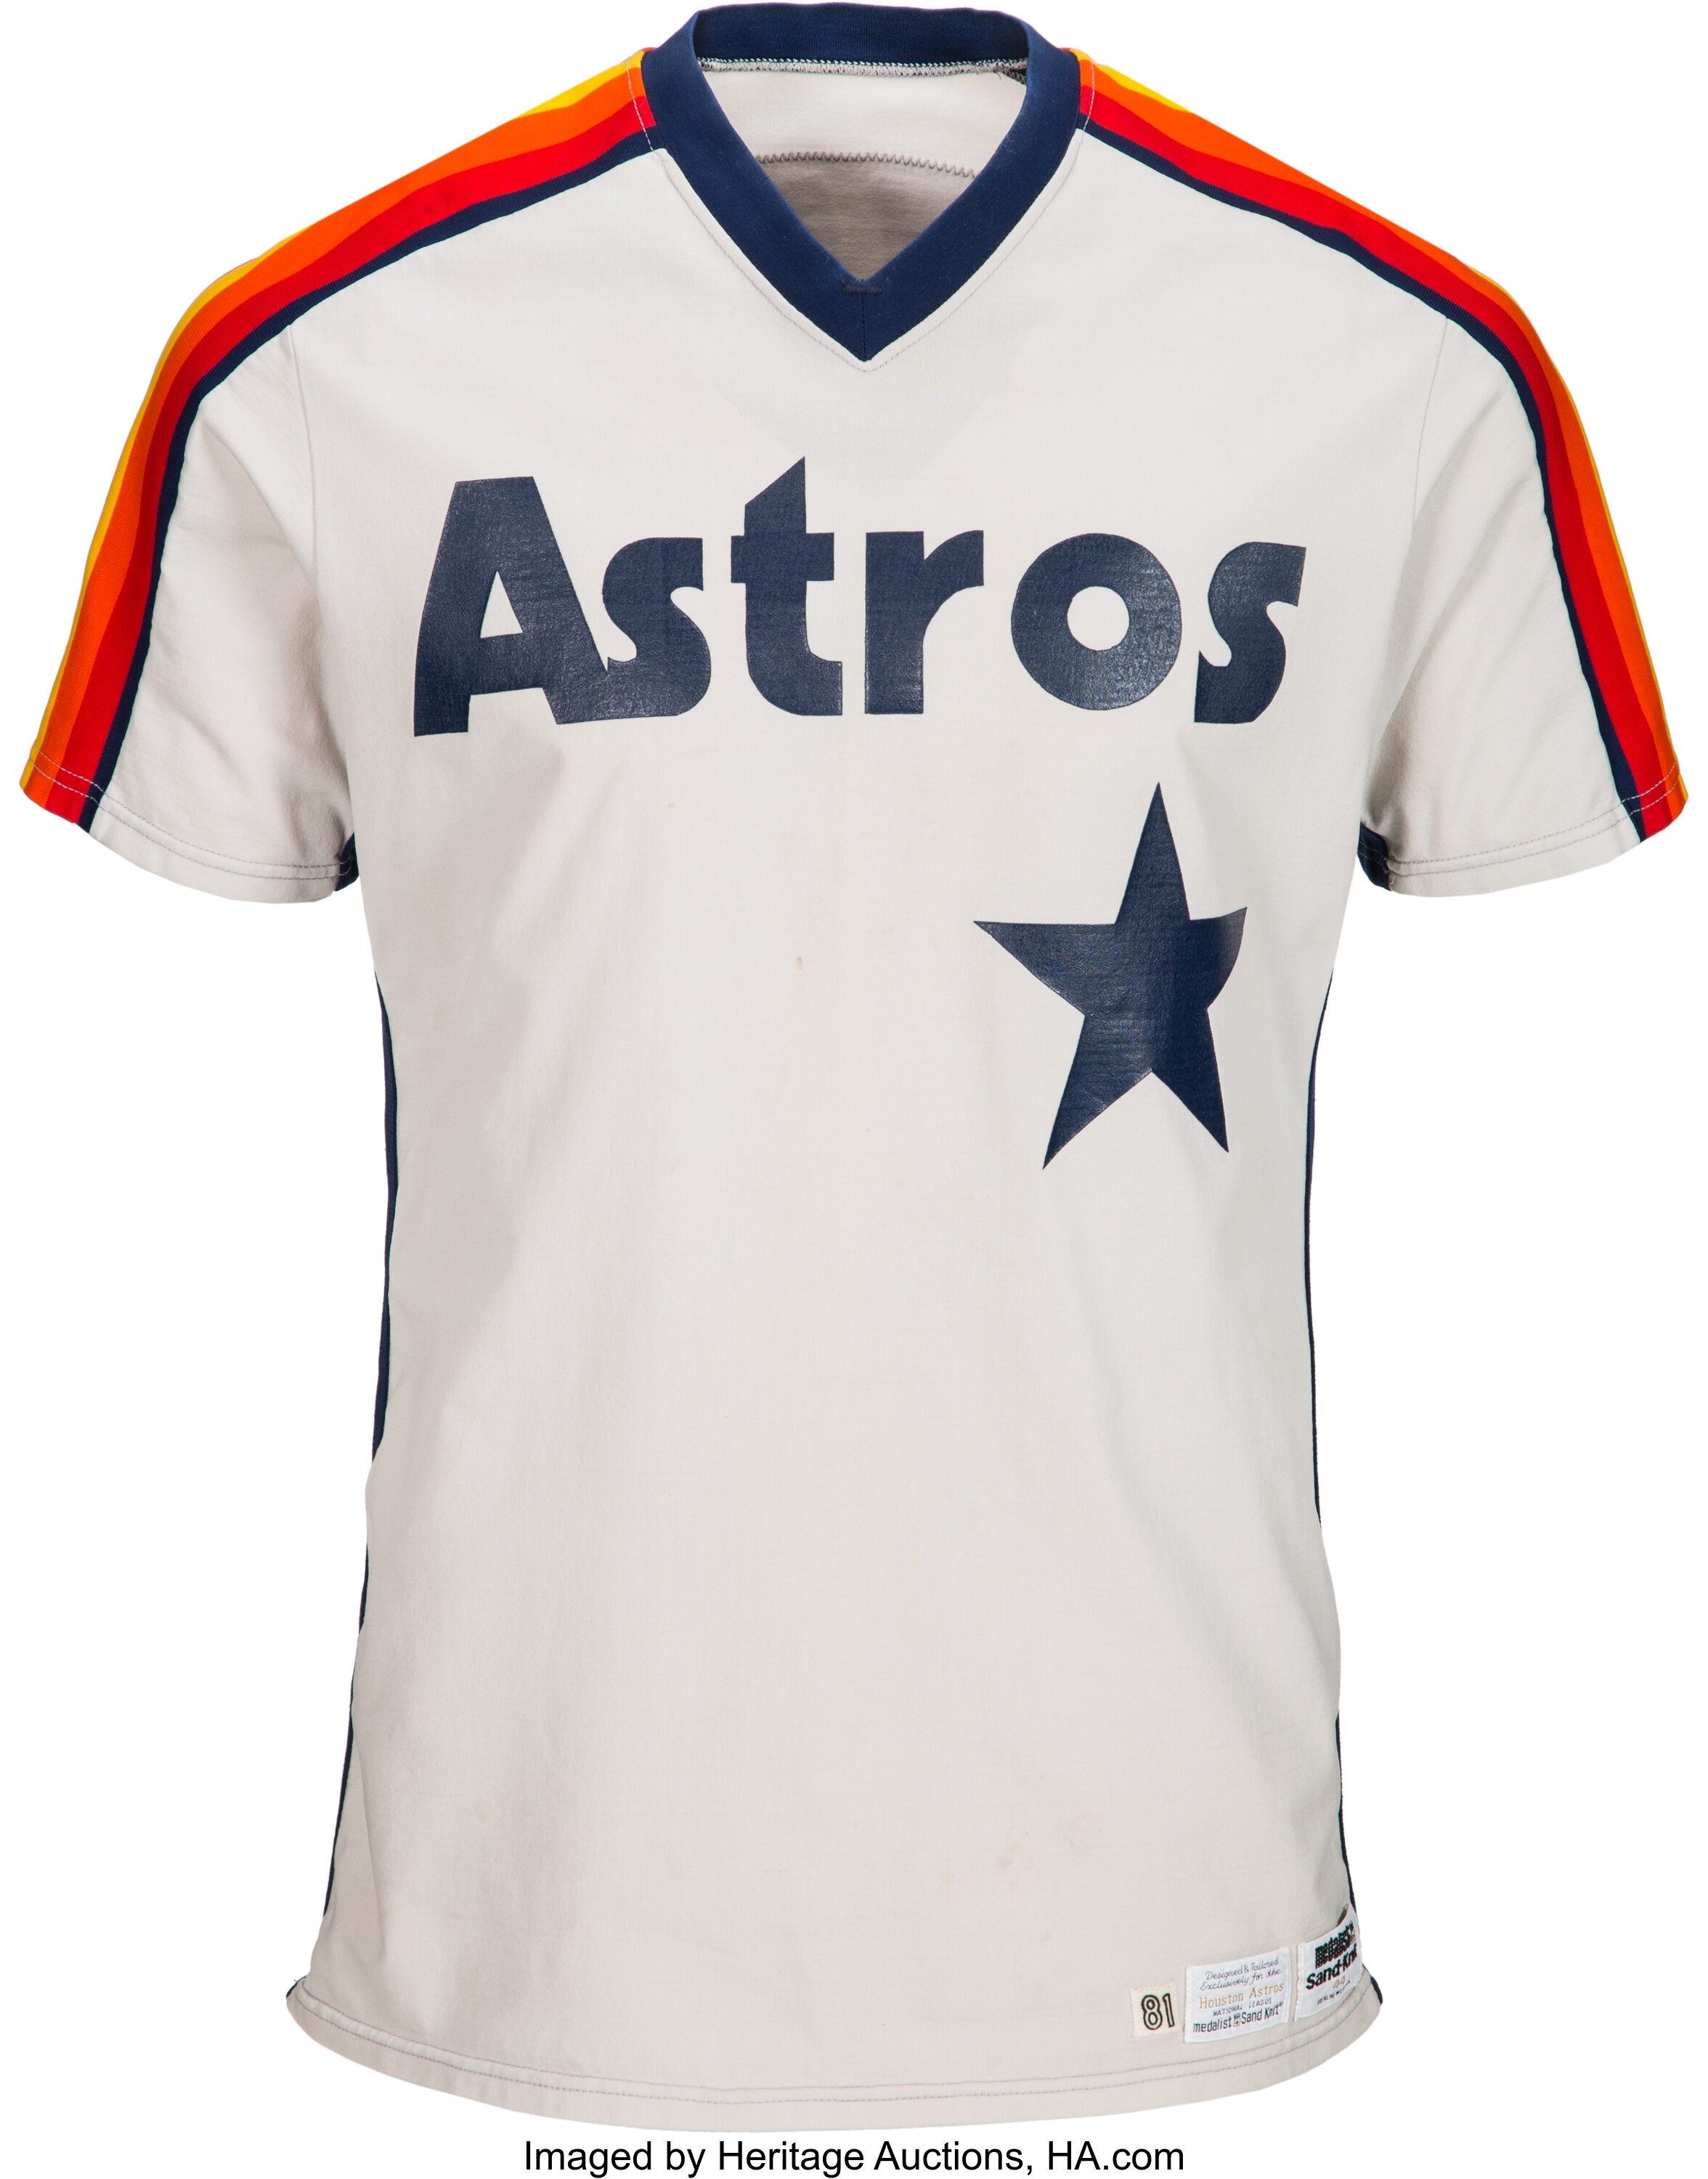 A jersey a day until the lockout ends or I run out. Day 37: 1980 Astros -  Nolan Ryan : r/baseball